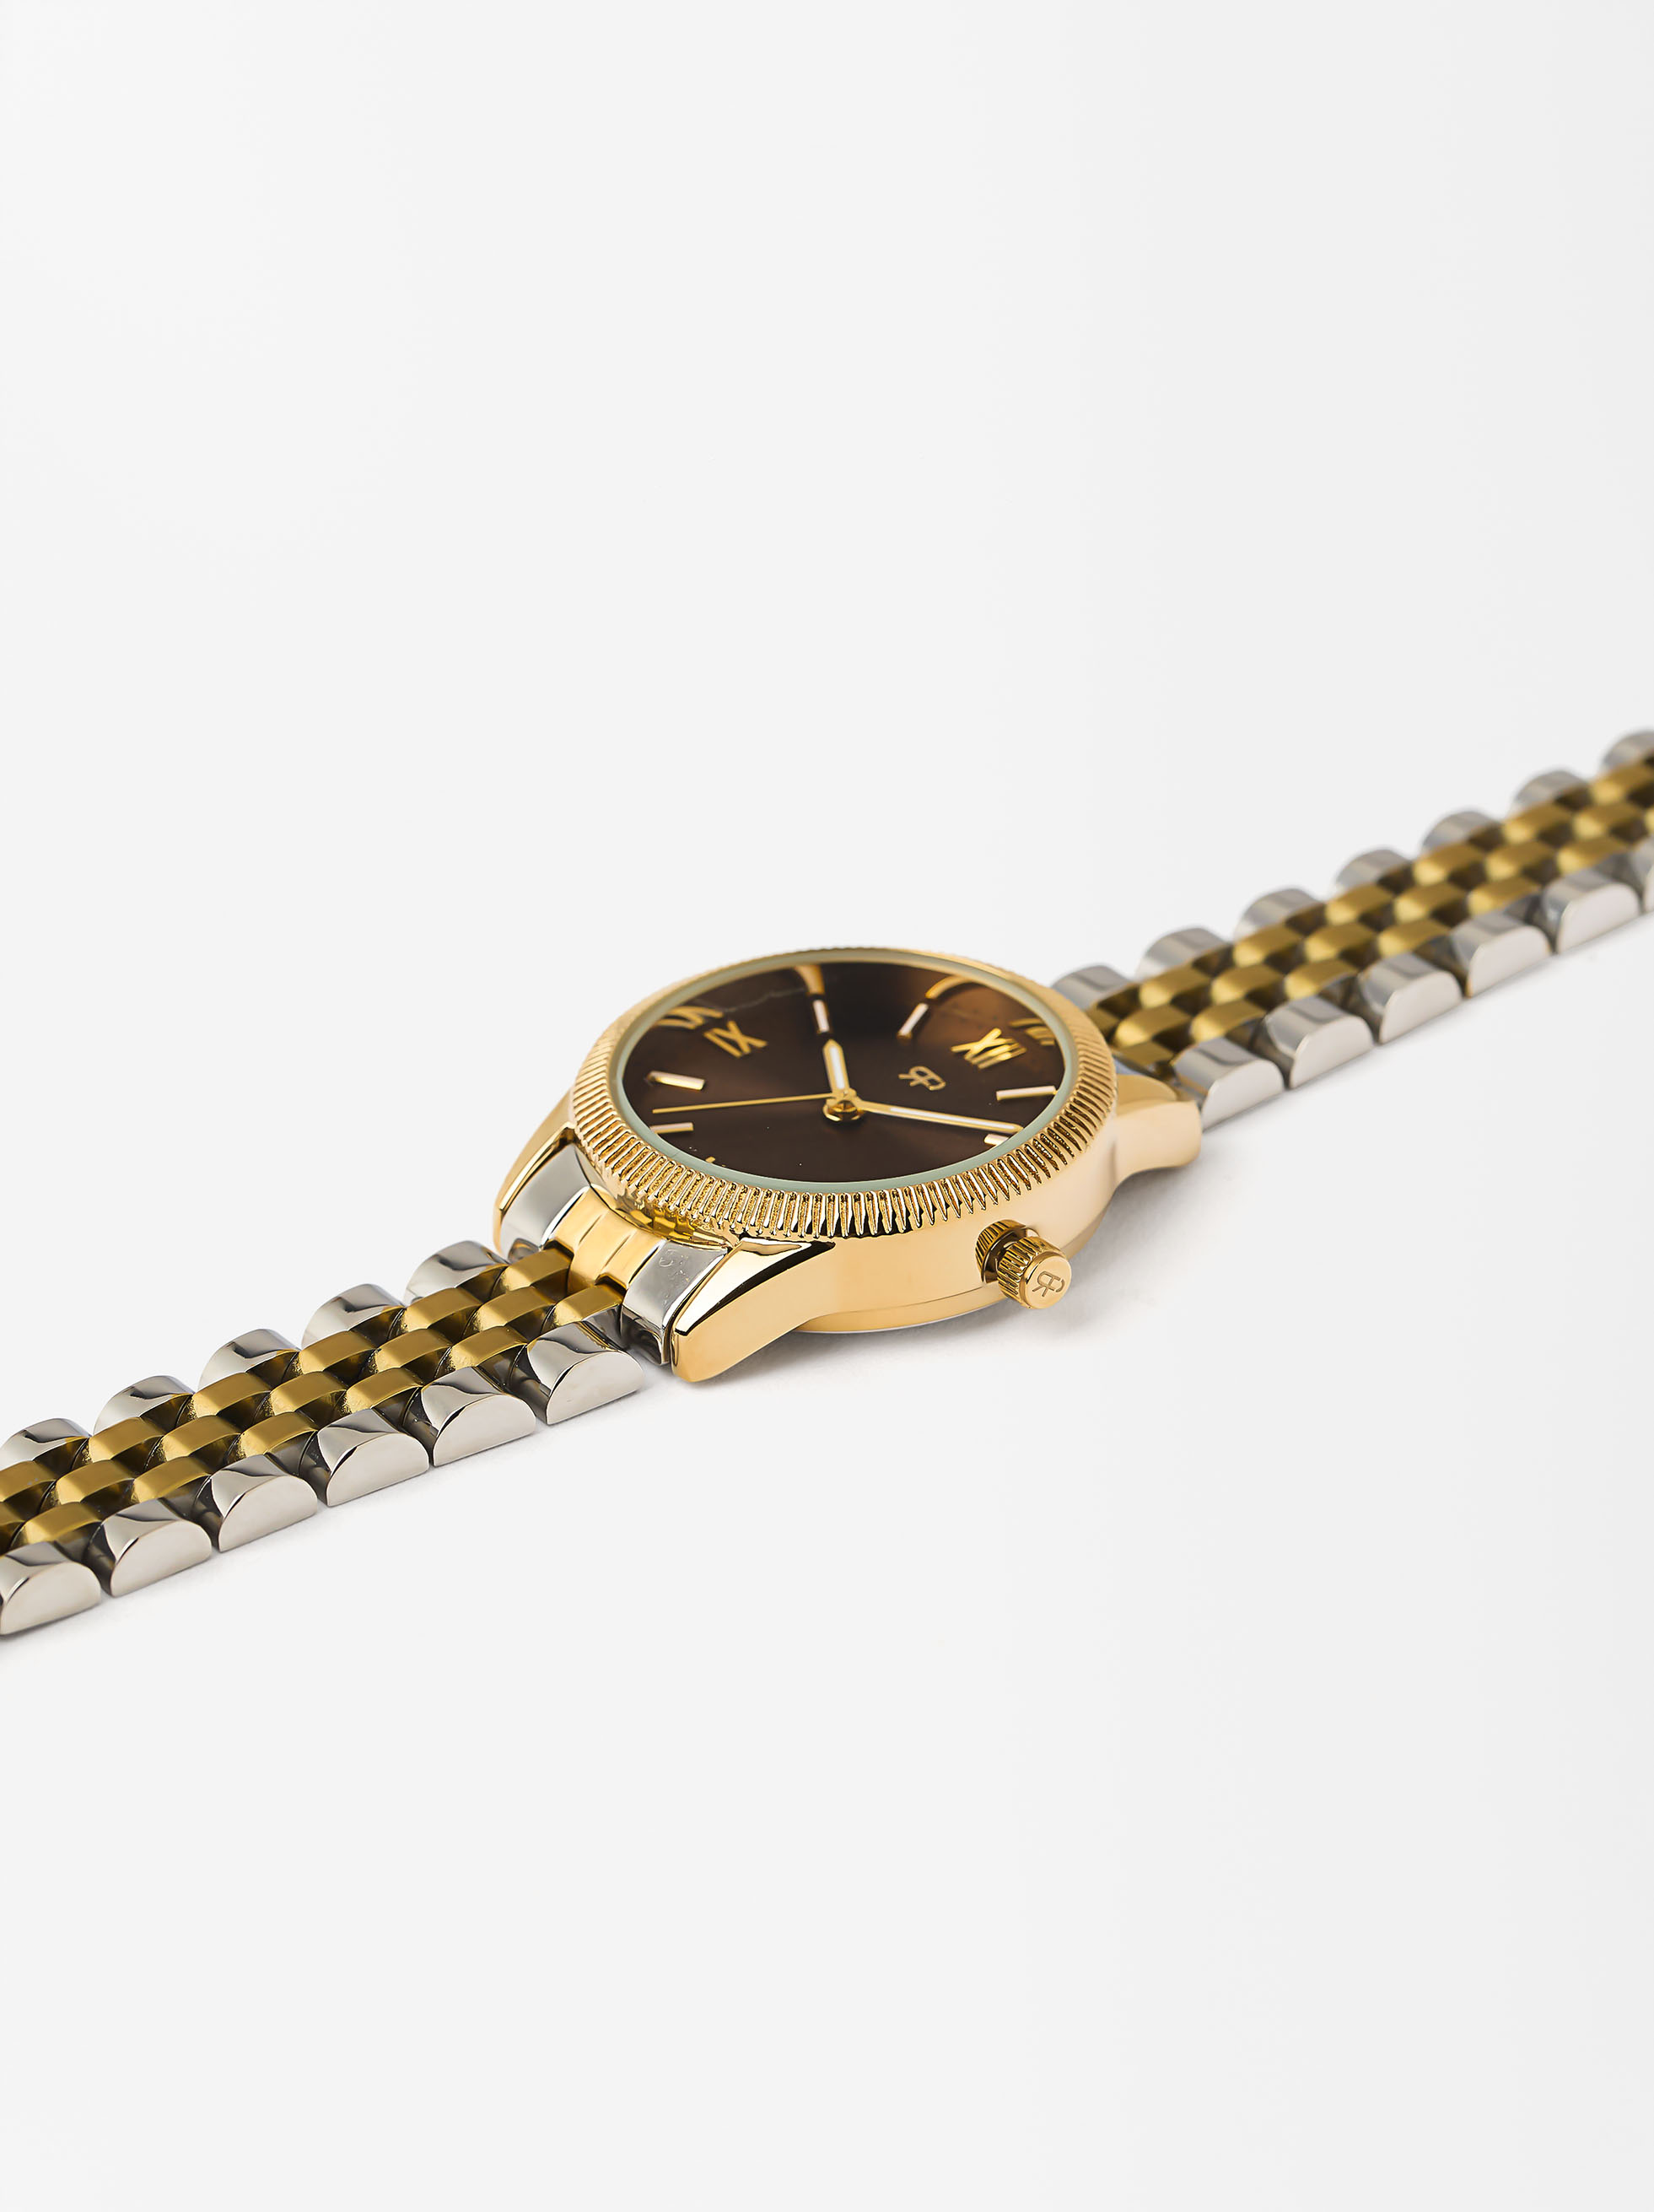 Personalized Watch With A Steel Bracelet image number 3.0